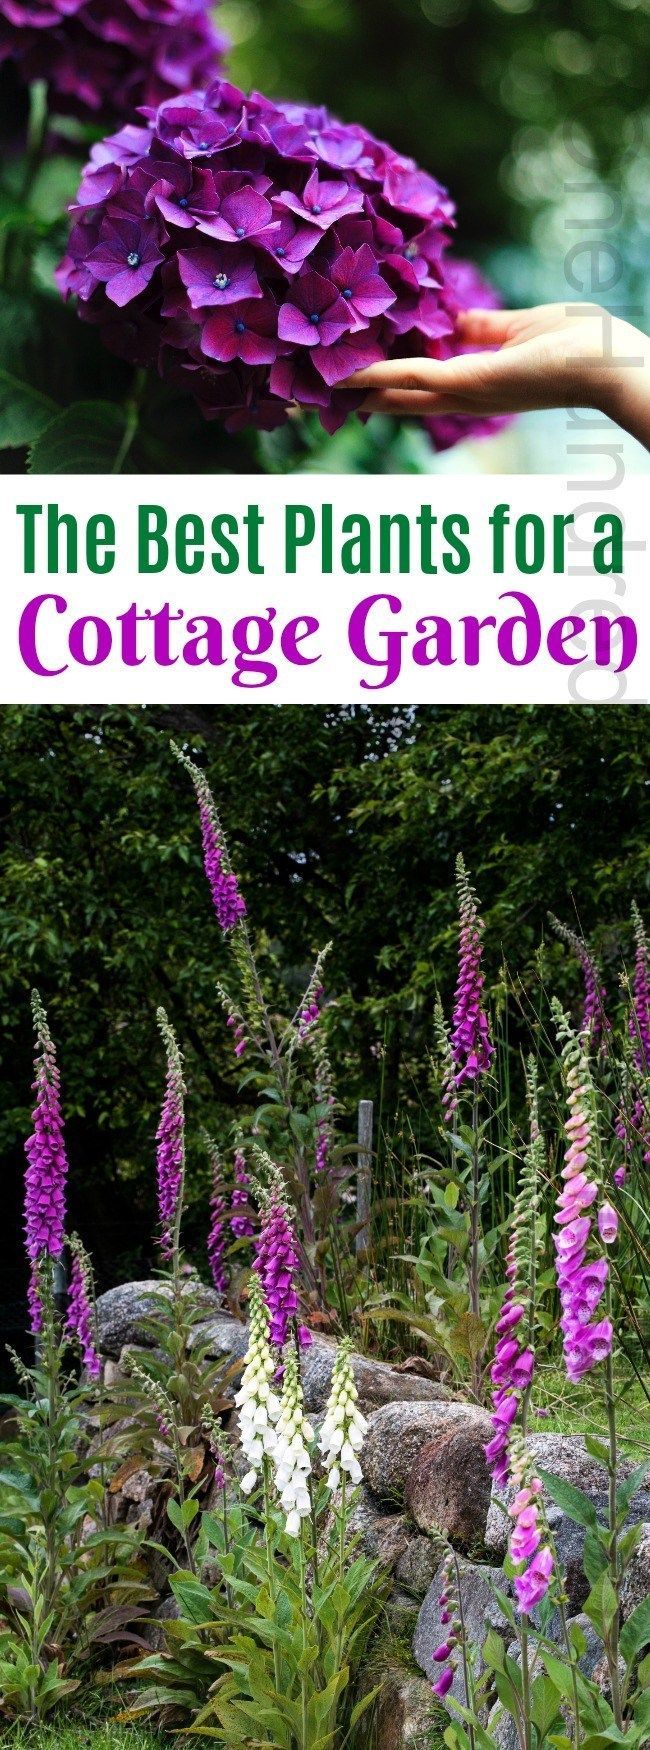 The Best Plants for a Cottage Garden -   18 plants Outdoor ideas